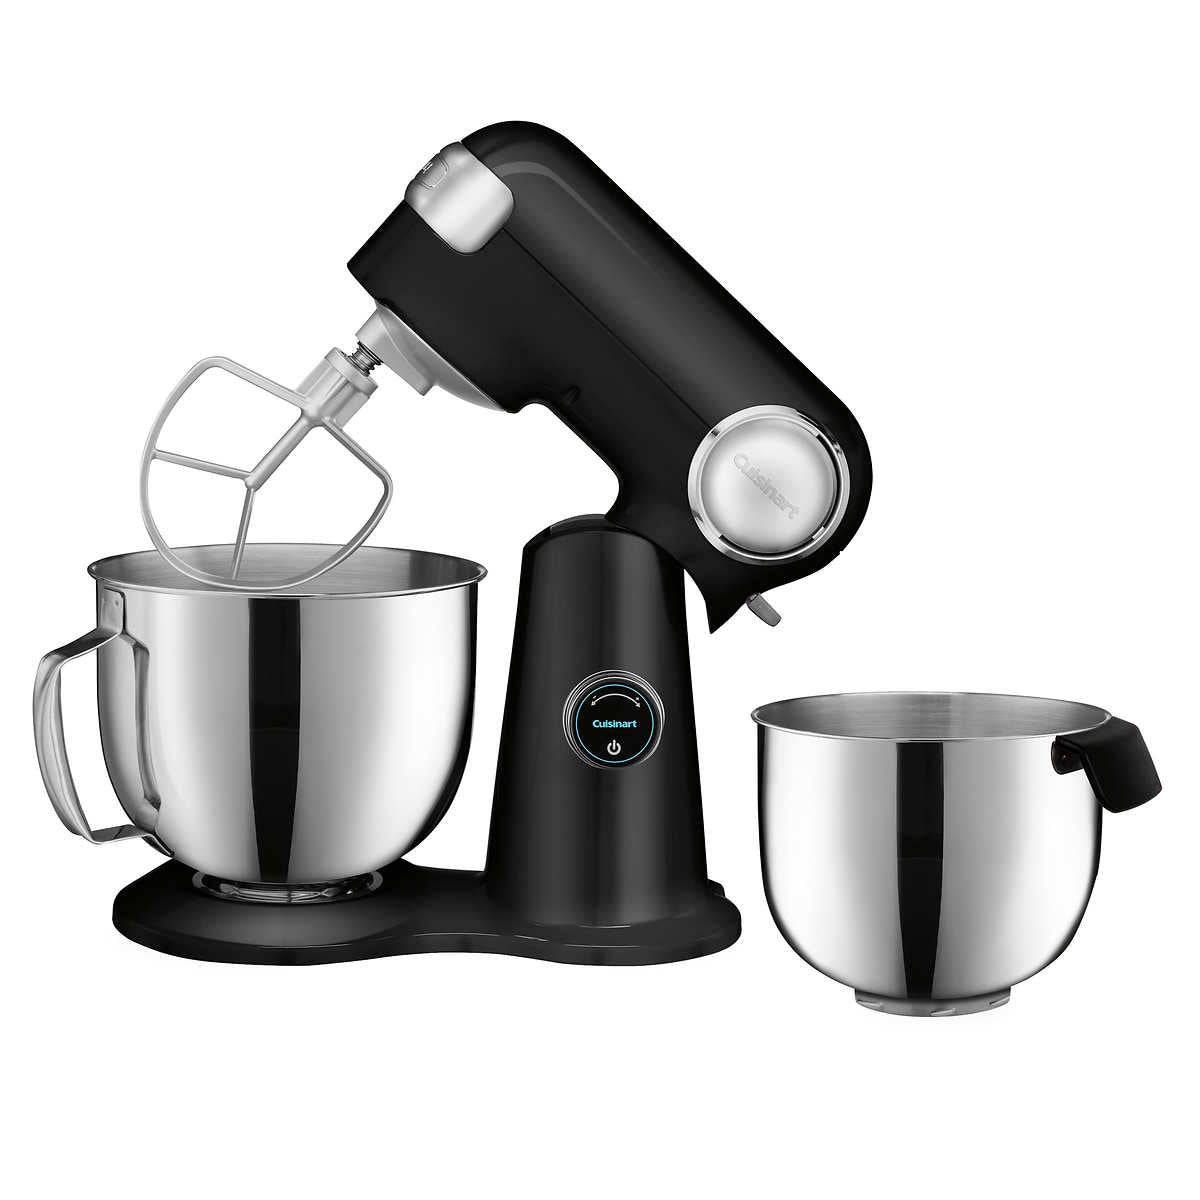 Cuisinart 5.2 L (5.5 Qt.) Precision Master Elite Digital Stand Mixer with Extra bowl (Refurbished-6 Month Warranty direct from Cuisinart))